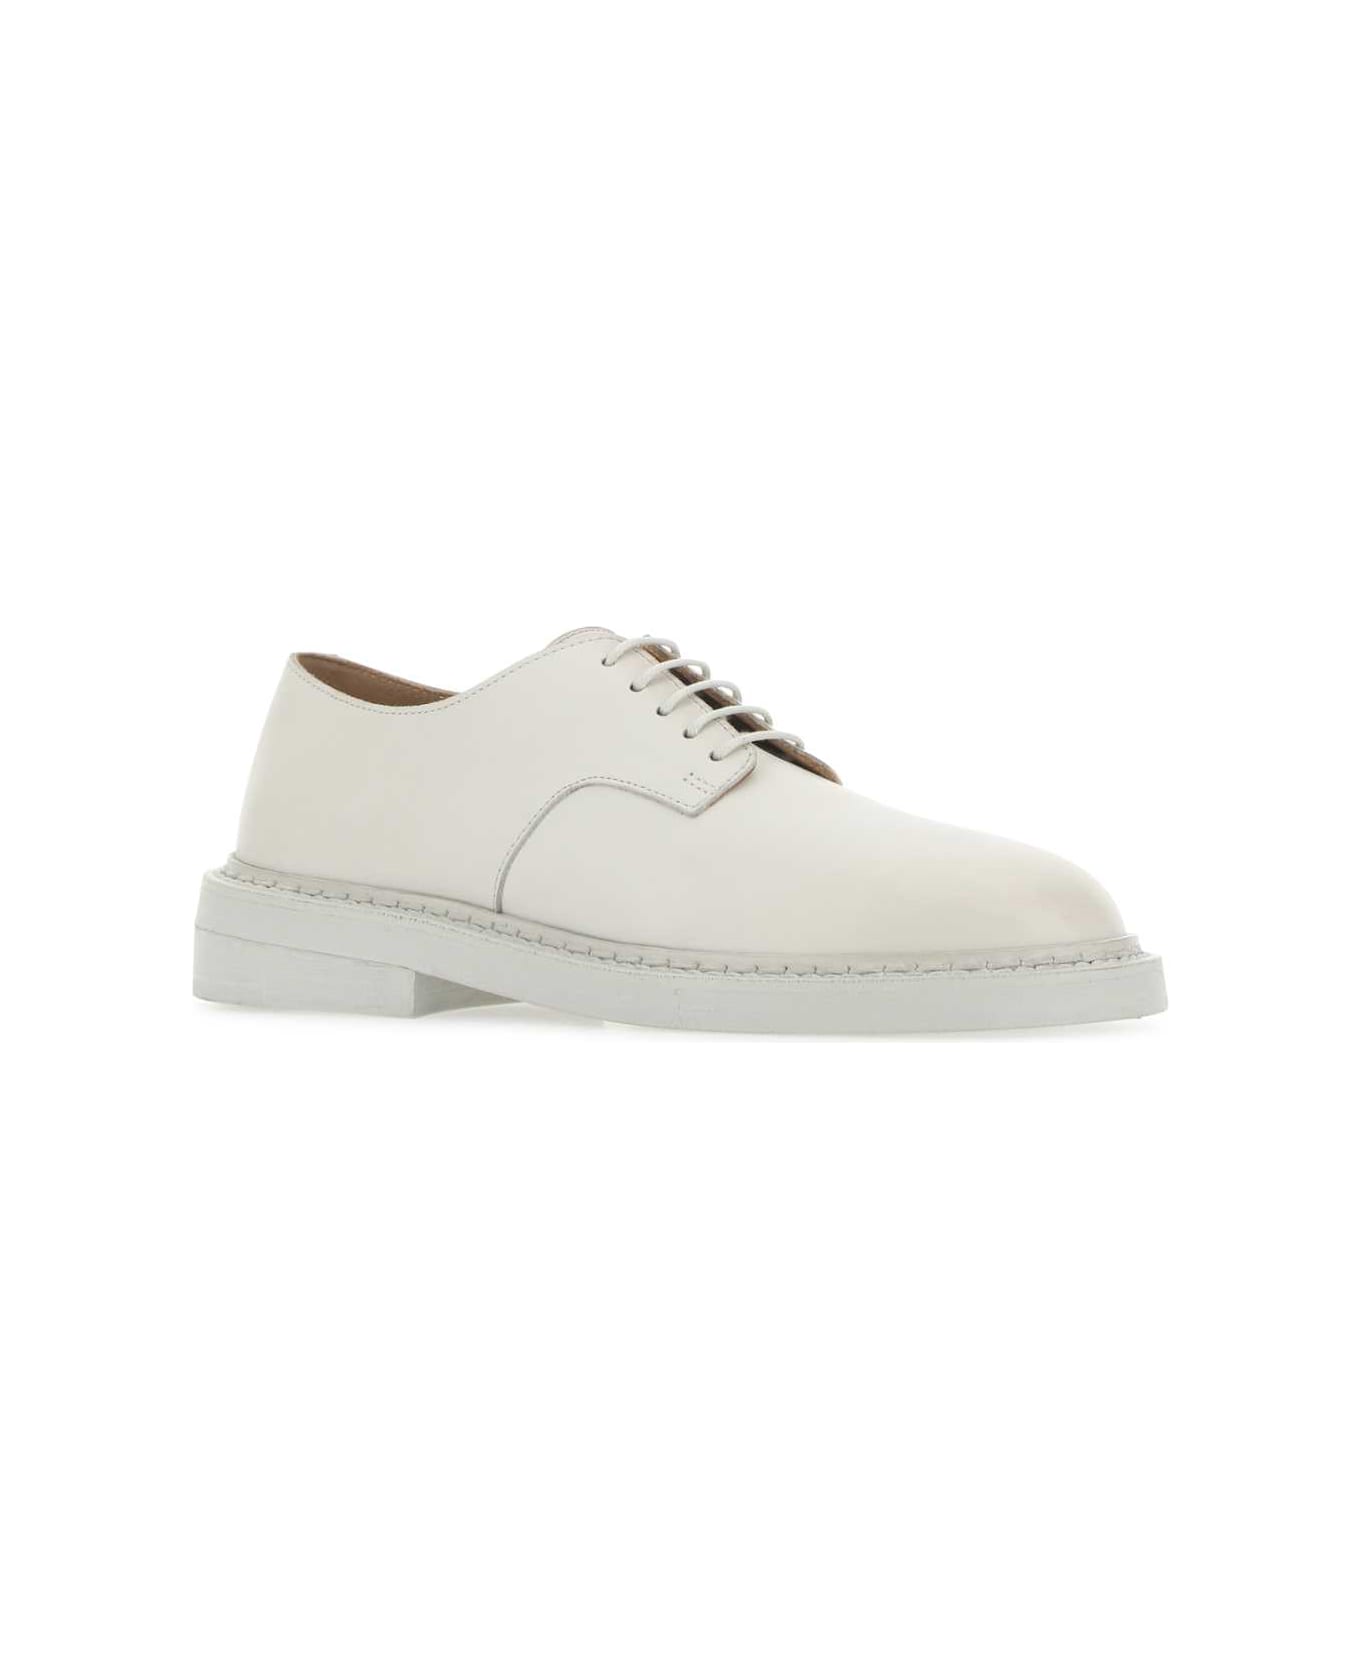 Marsell Chalk Leather Nasello Lace-up Shoes - 121 フラットシューズ